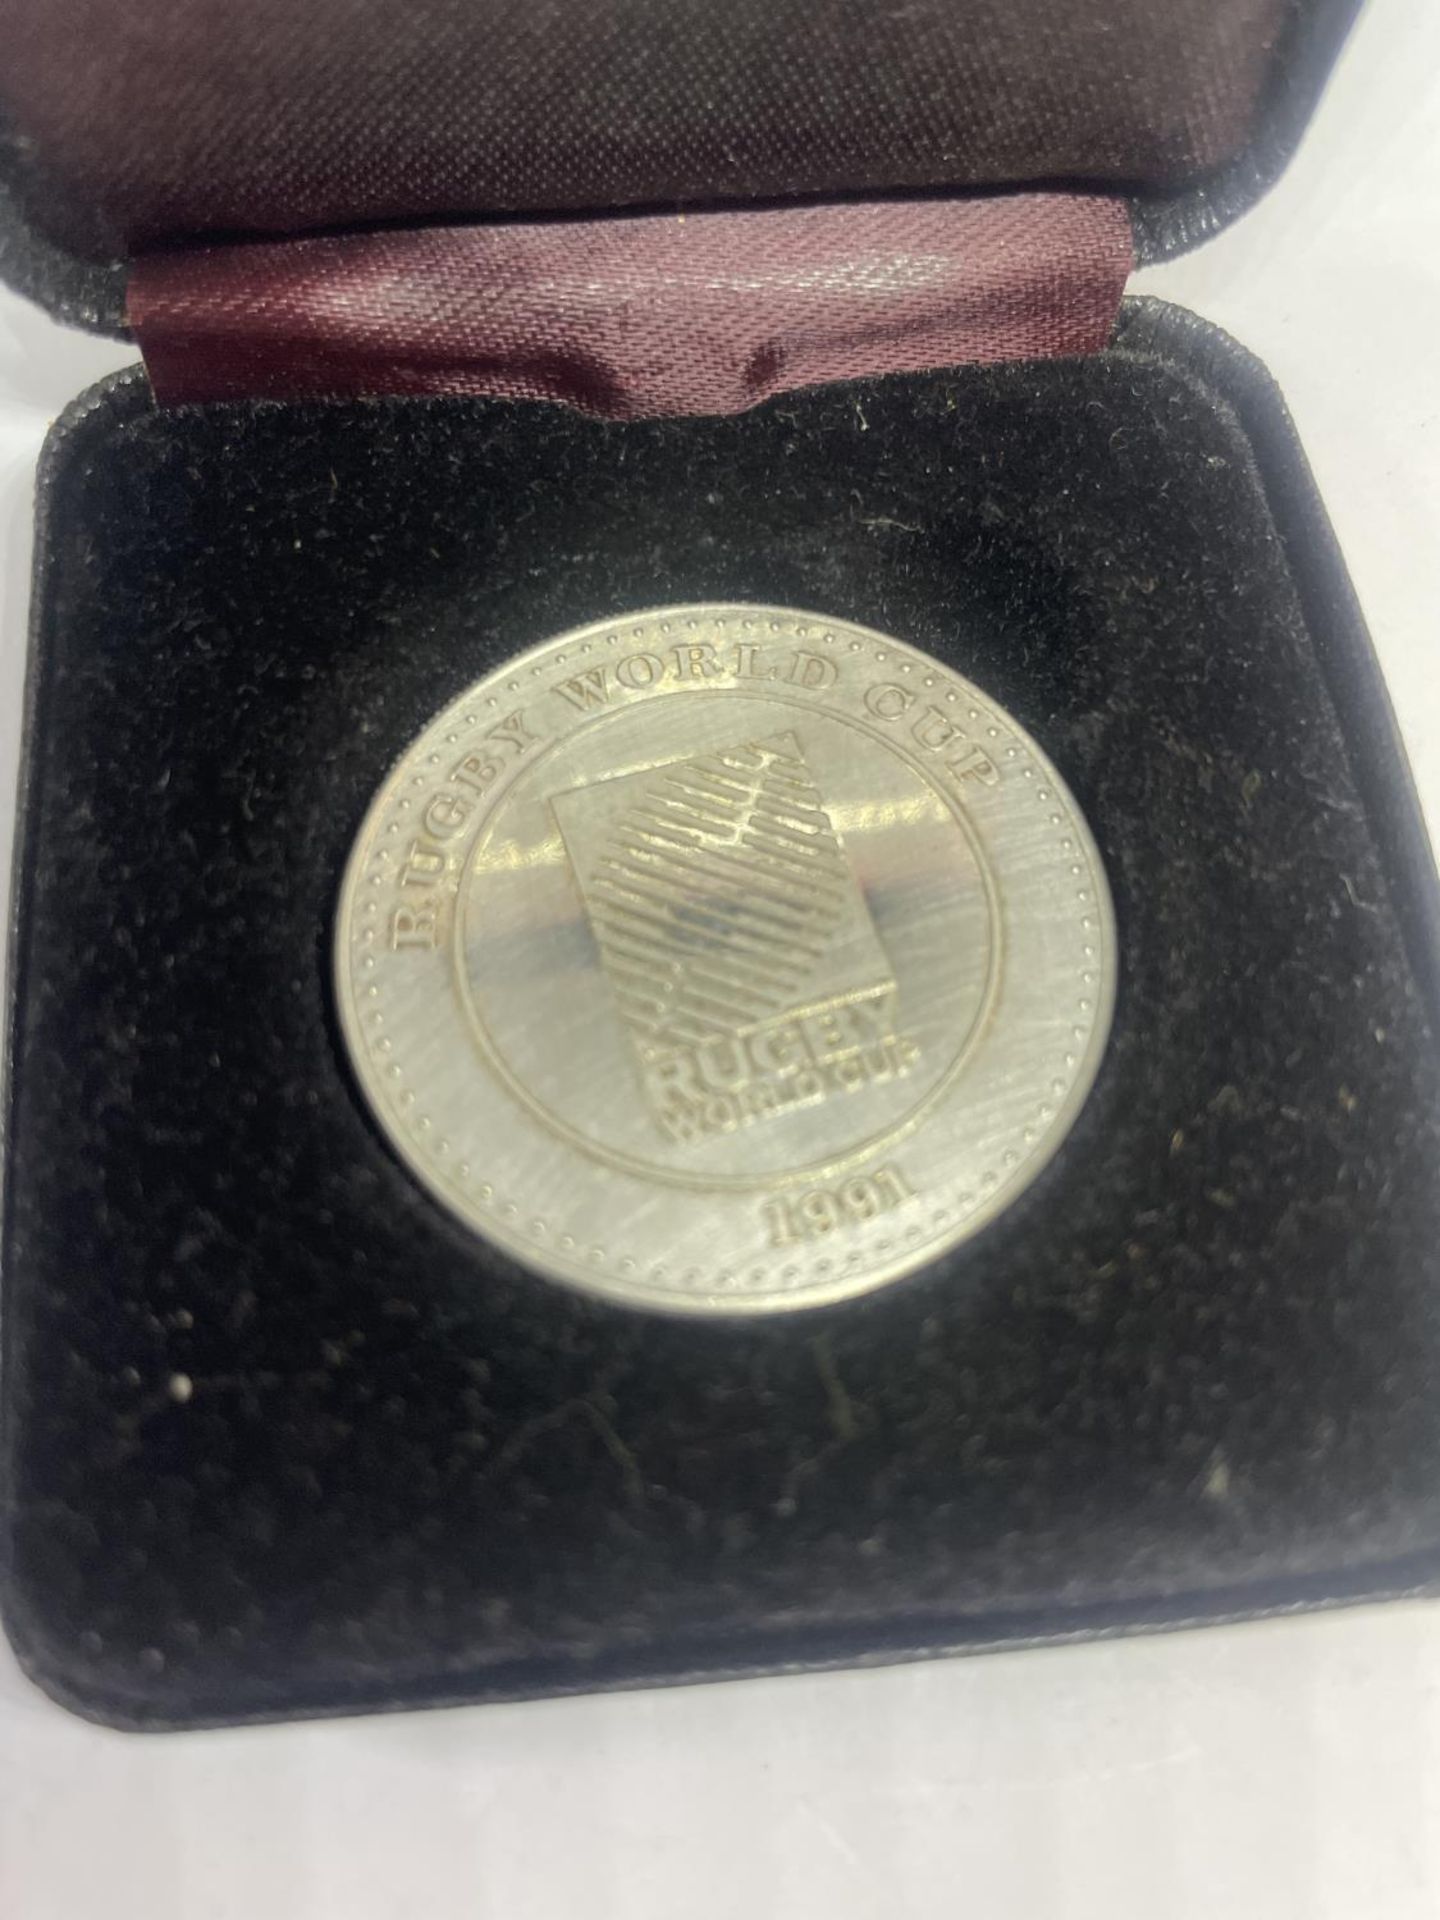 A SILVER 1991 RUGBY WORLD CUP MEDAL IN A PRESENTATION BOX - Image 3 of 4